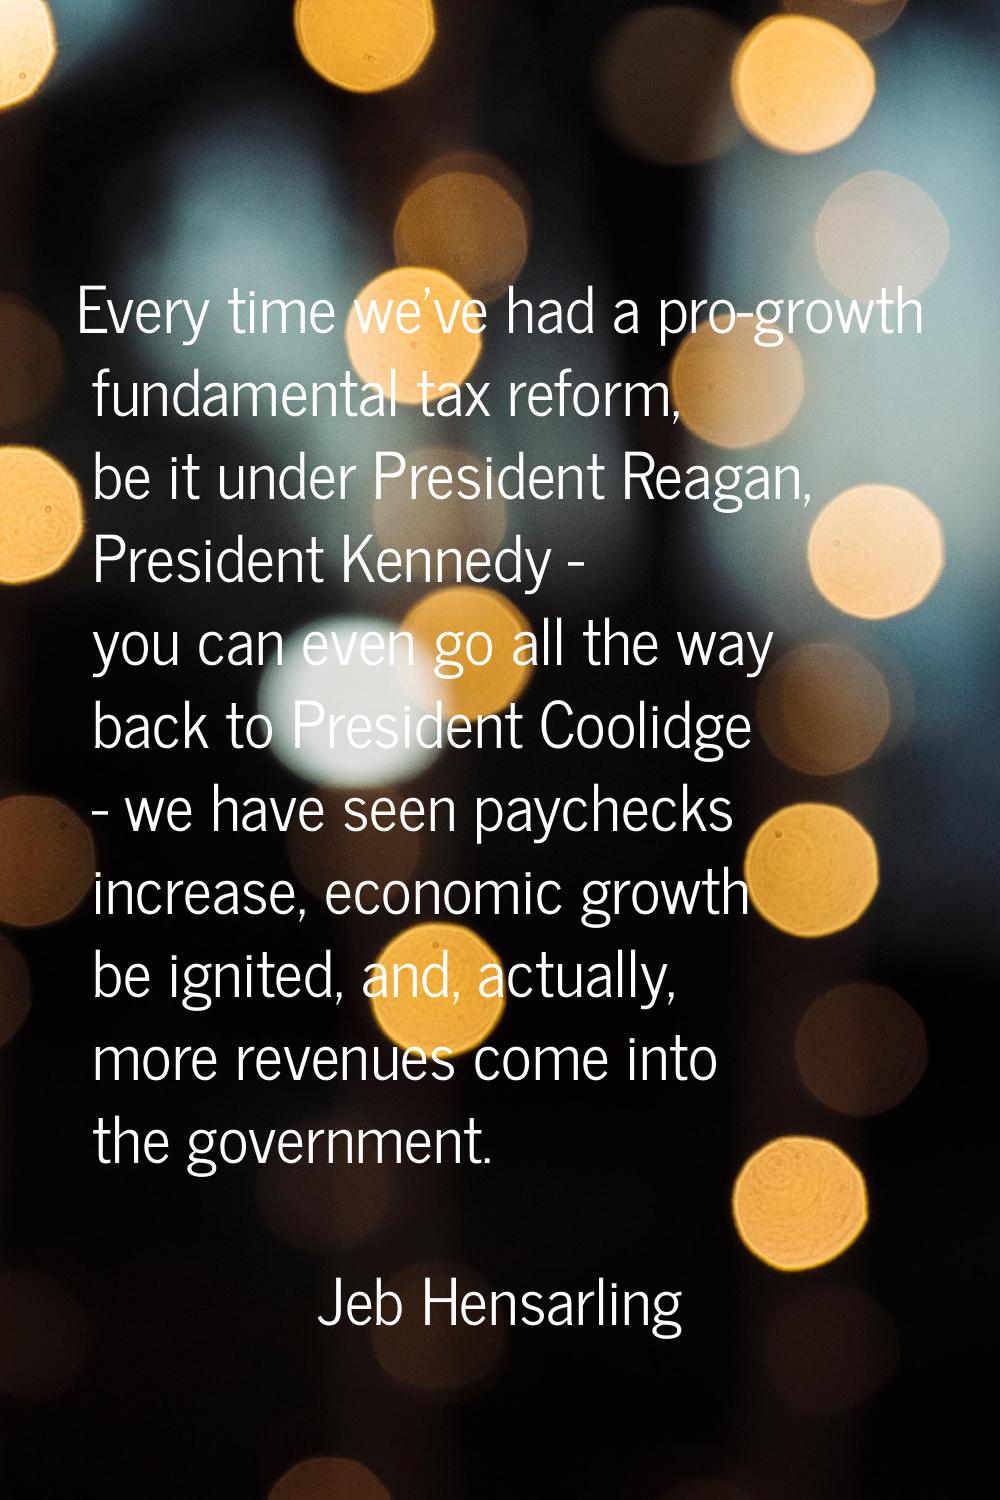 Every time we've had a pro-growth fundamental tax reform, be it under President Reagan, President K